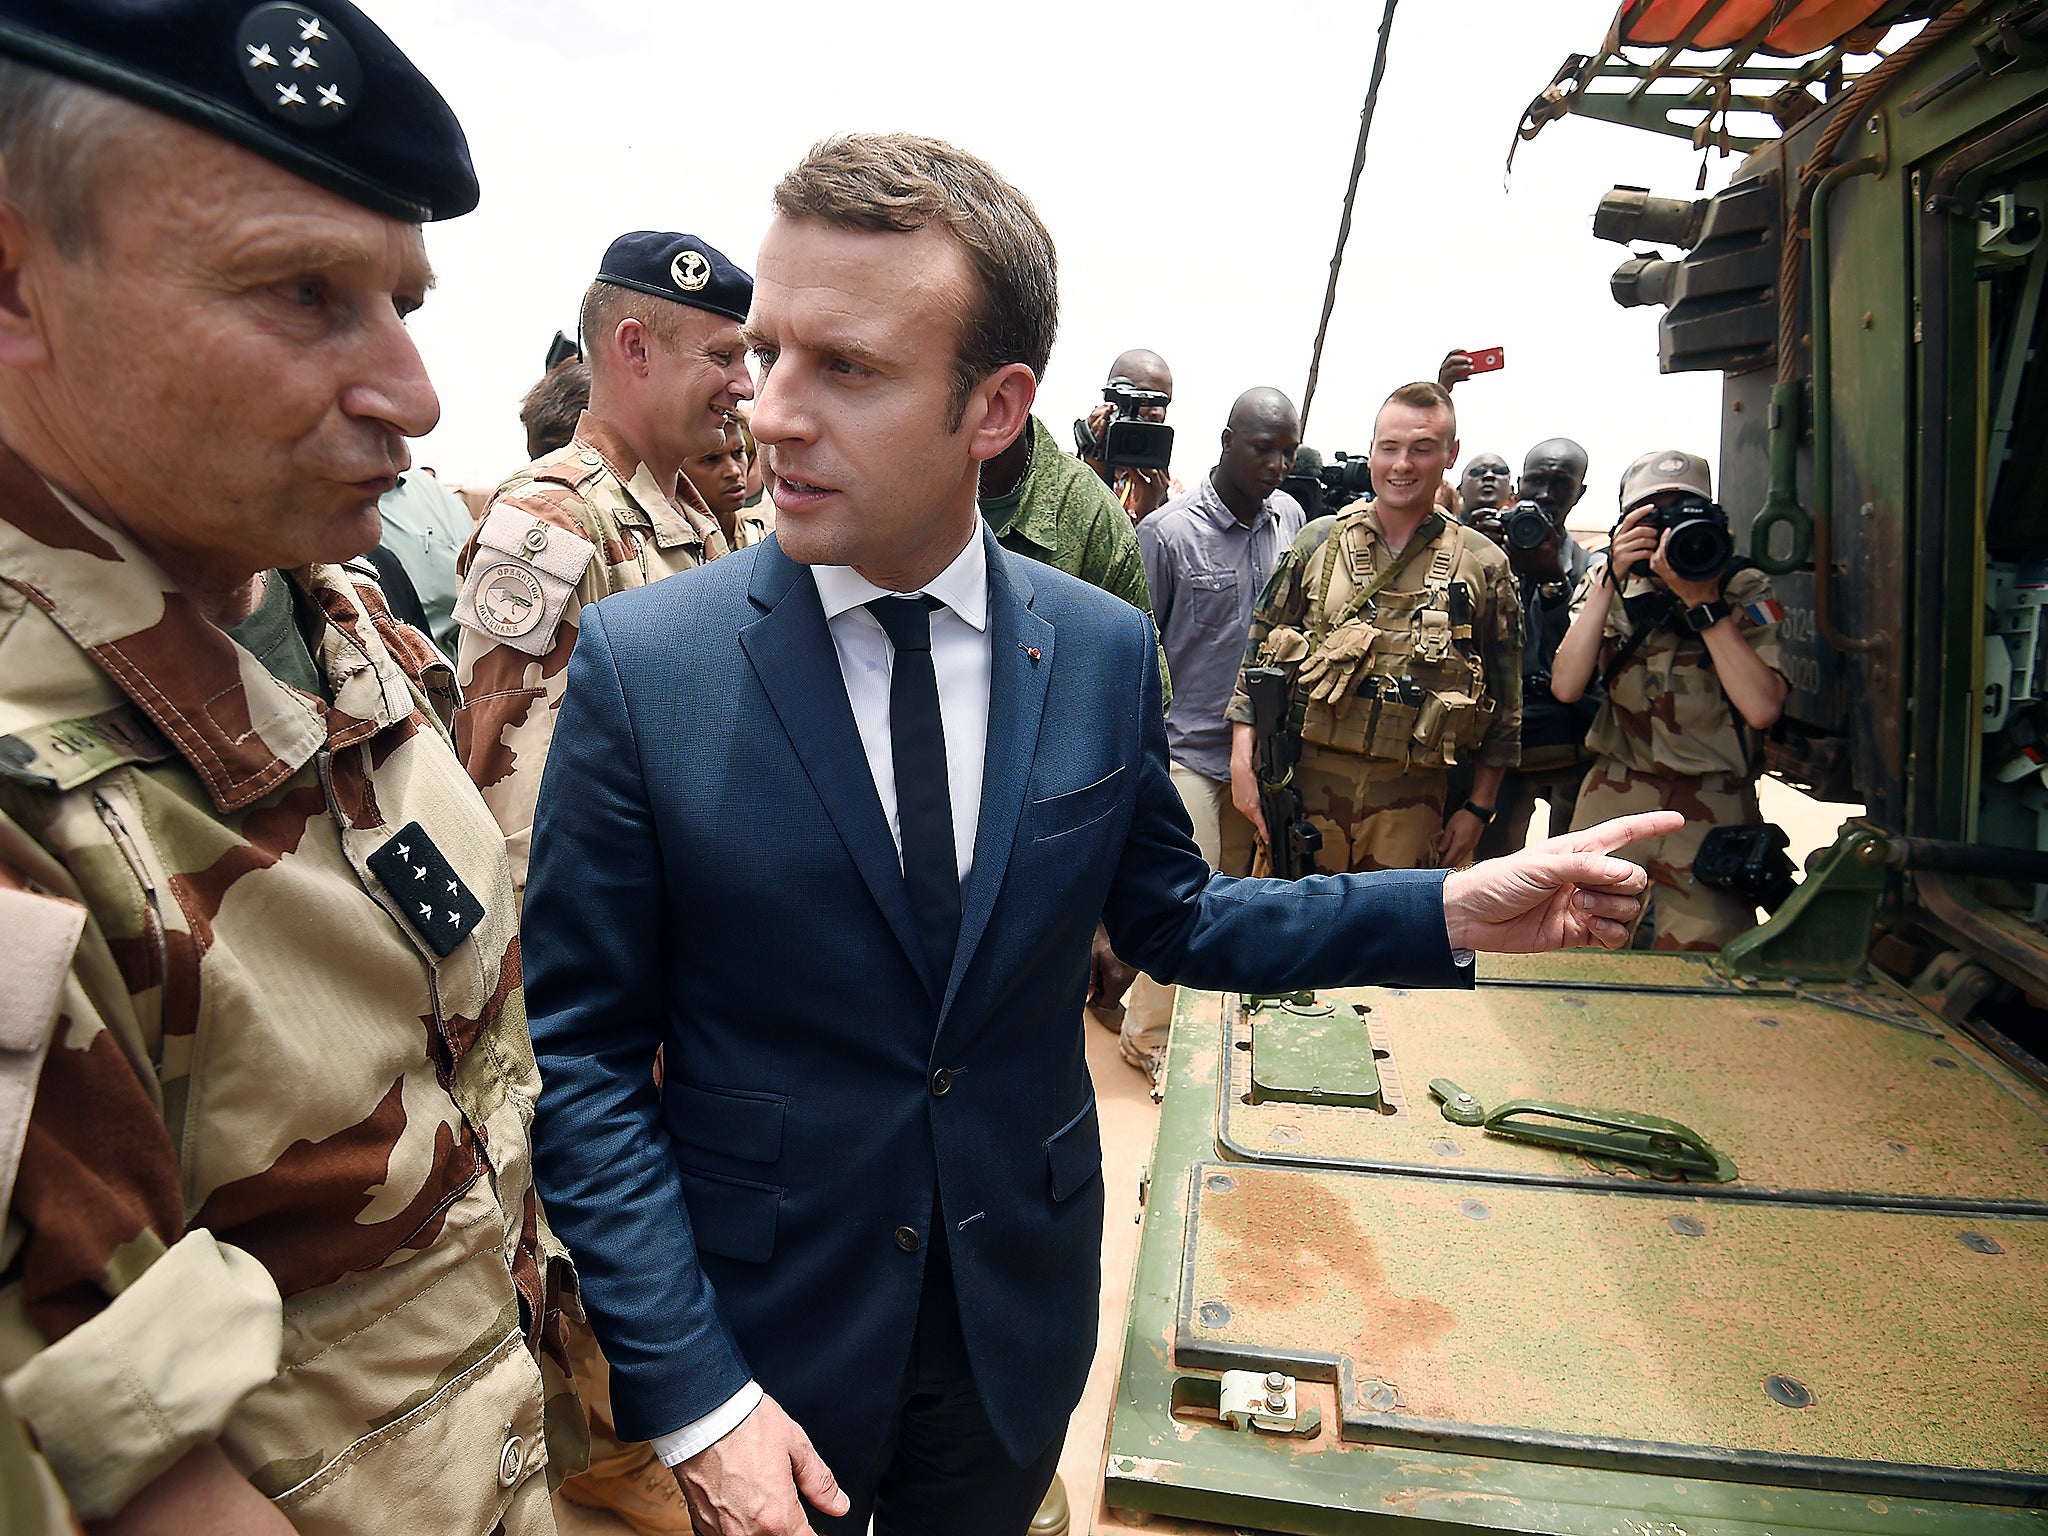 French President Macron only received a narrow victory over the number of abstentions